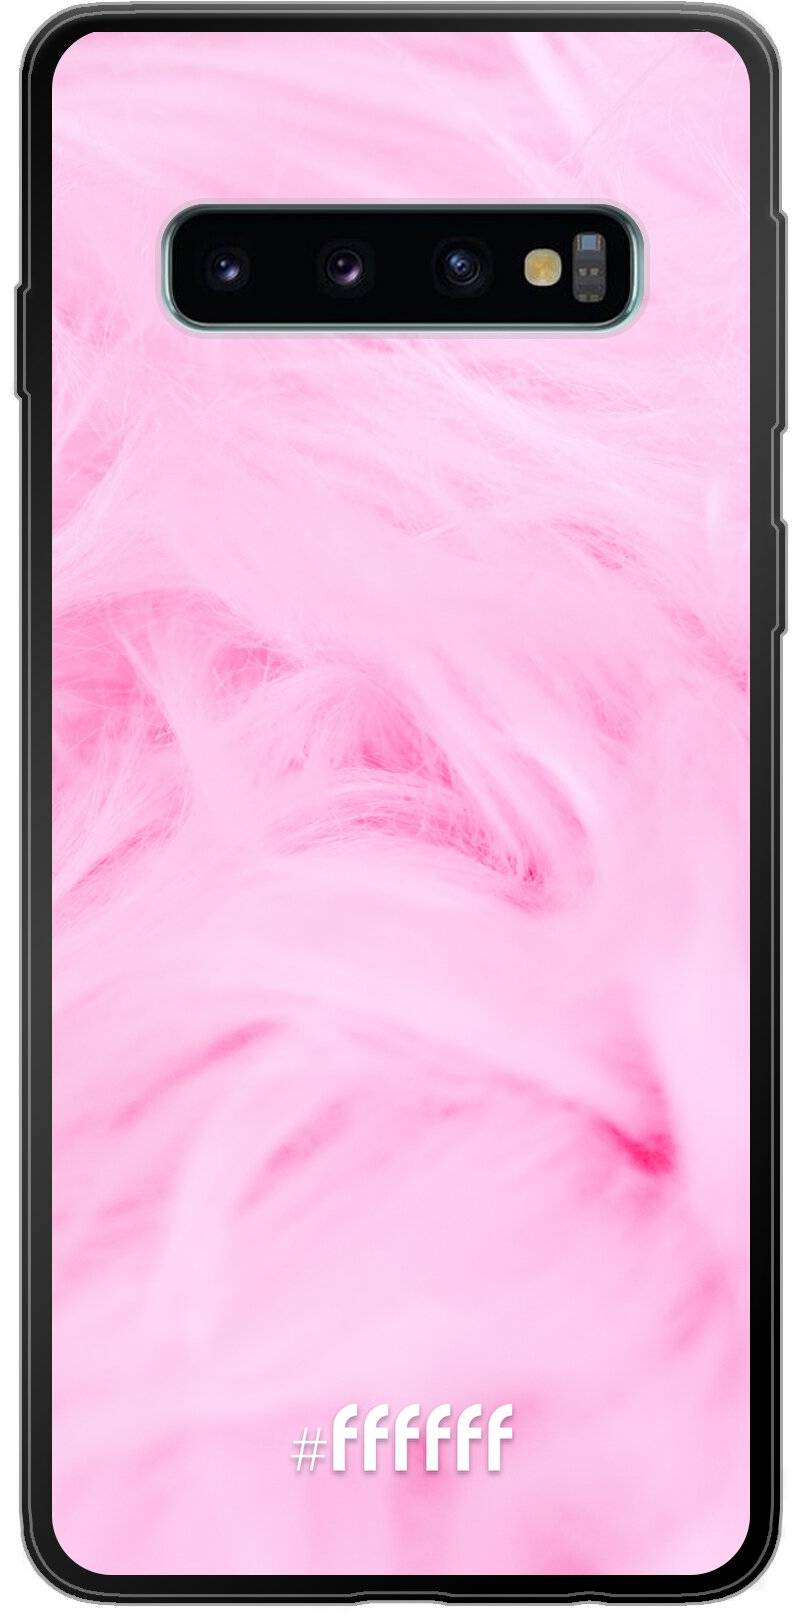 Cotton Candy Galaxy S10